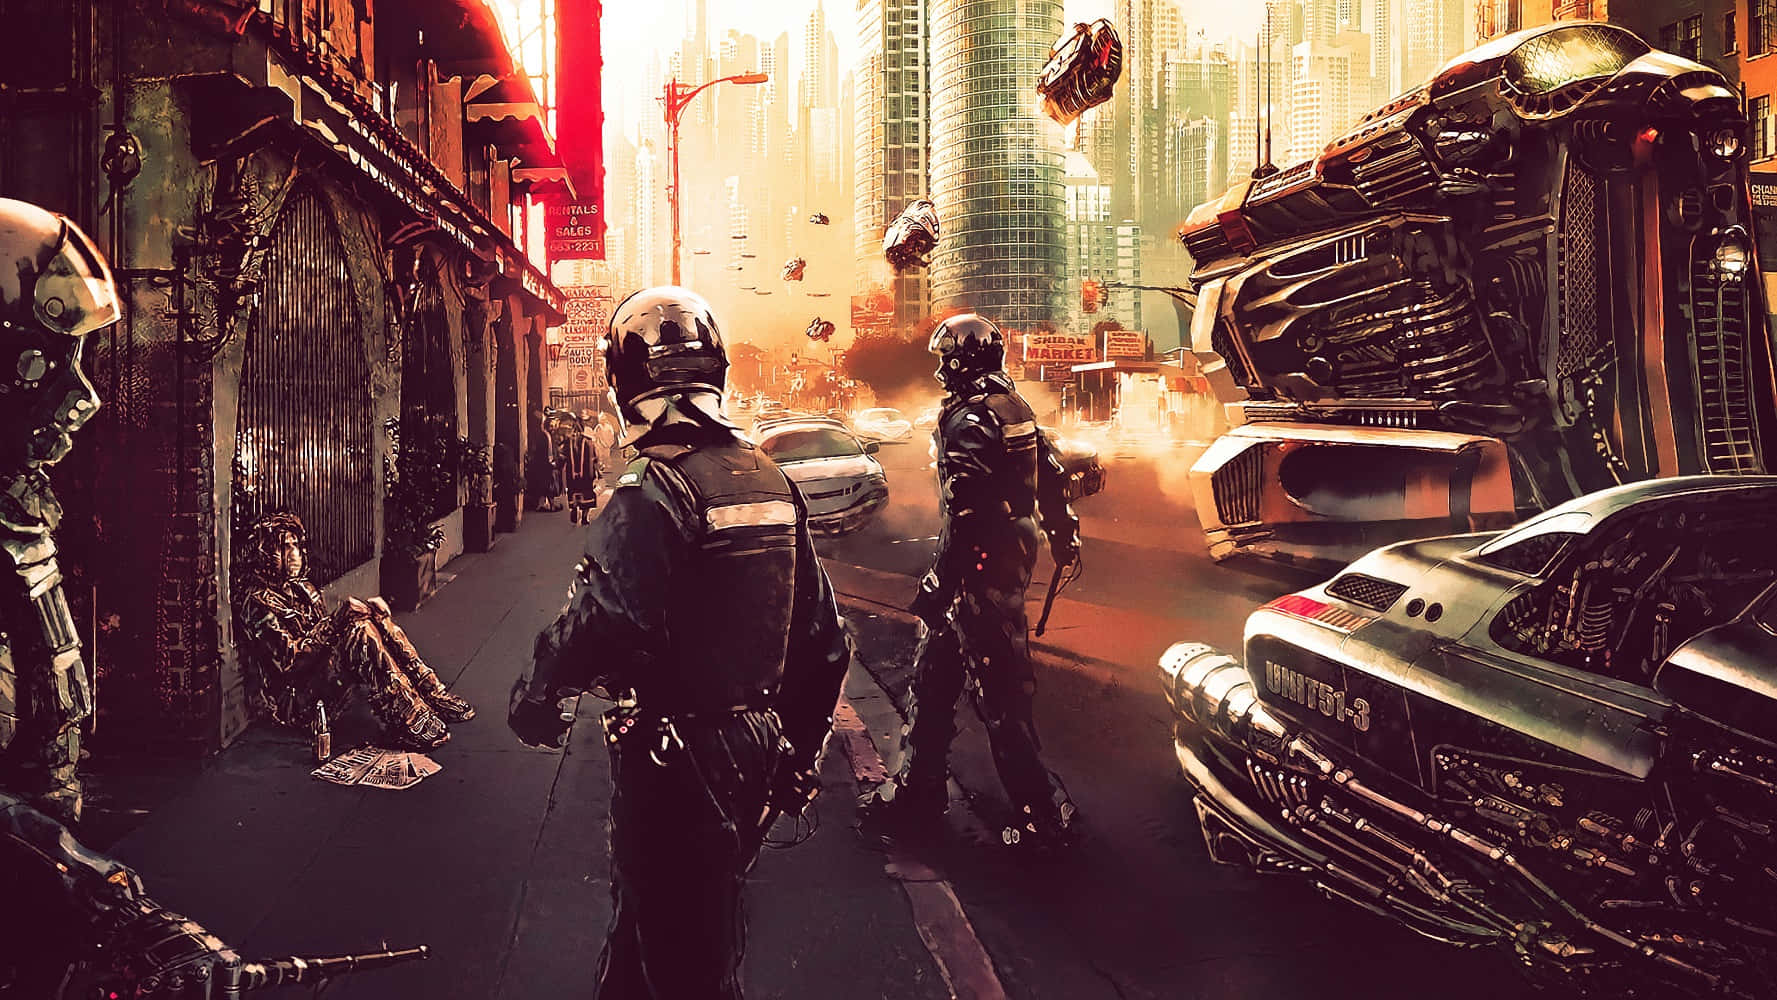 A City With A Group Of People In Futuristic Clothing